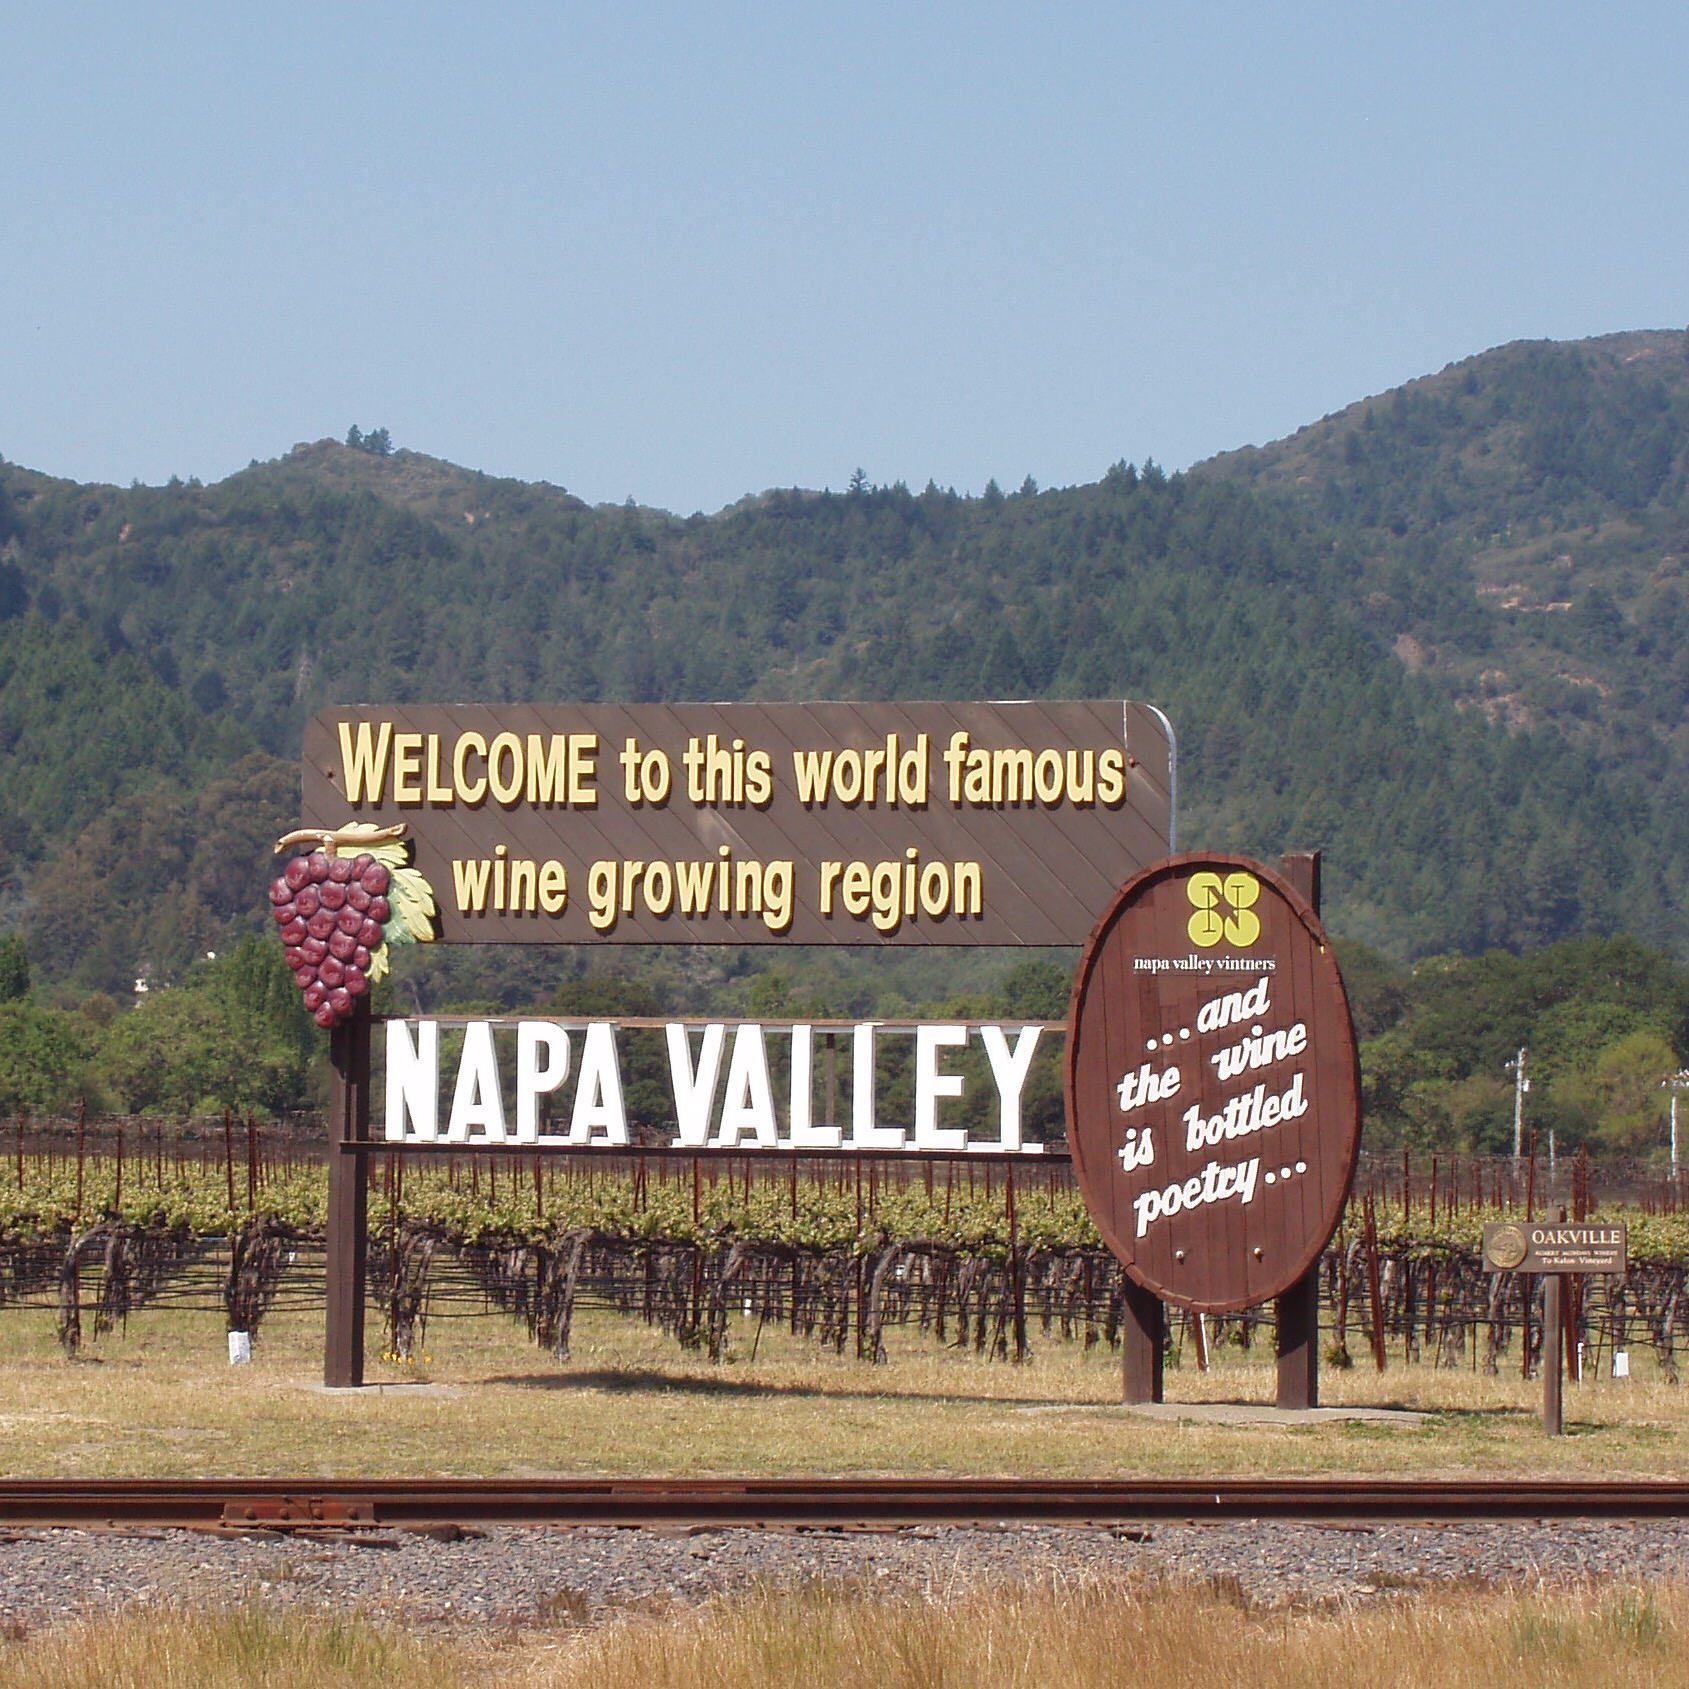 Famous sign in Napa Valley welcoming people to the region